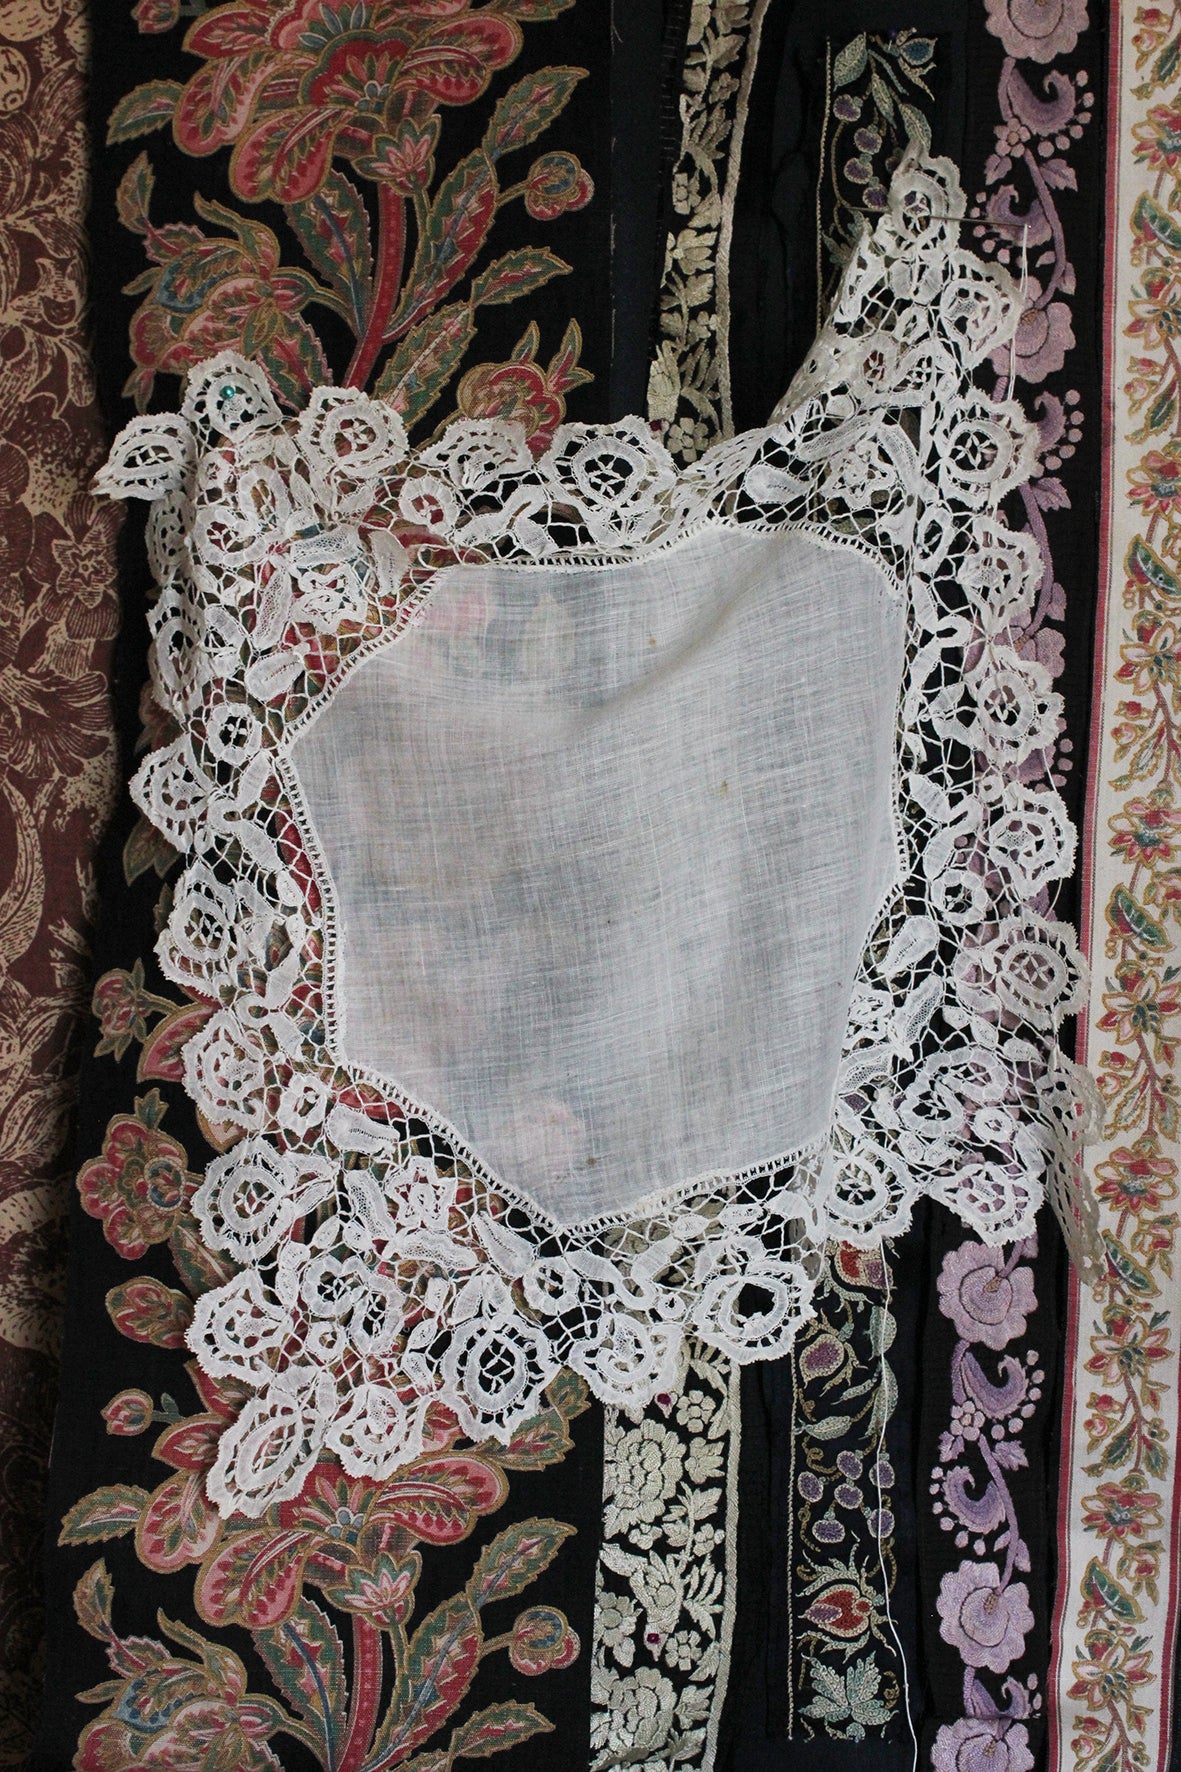 Antique Hand Made Honiton Lace Edged Handkerchief.